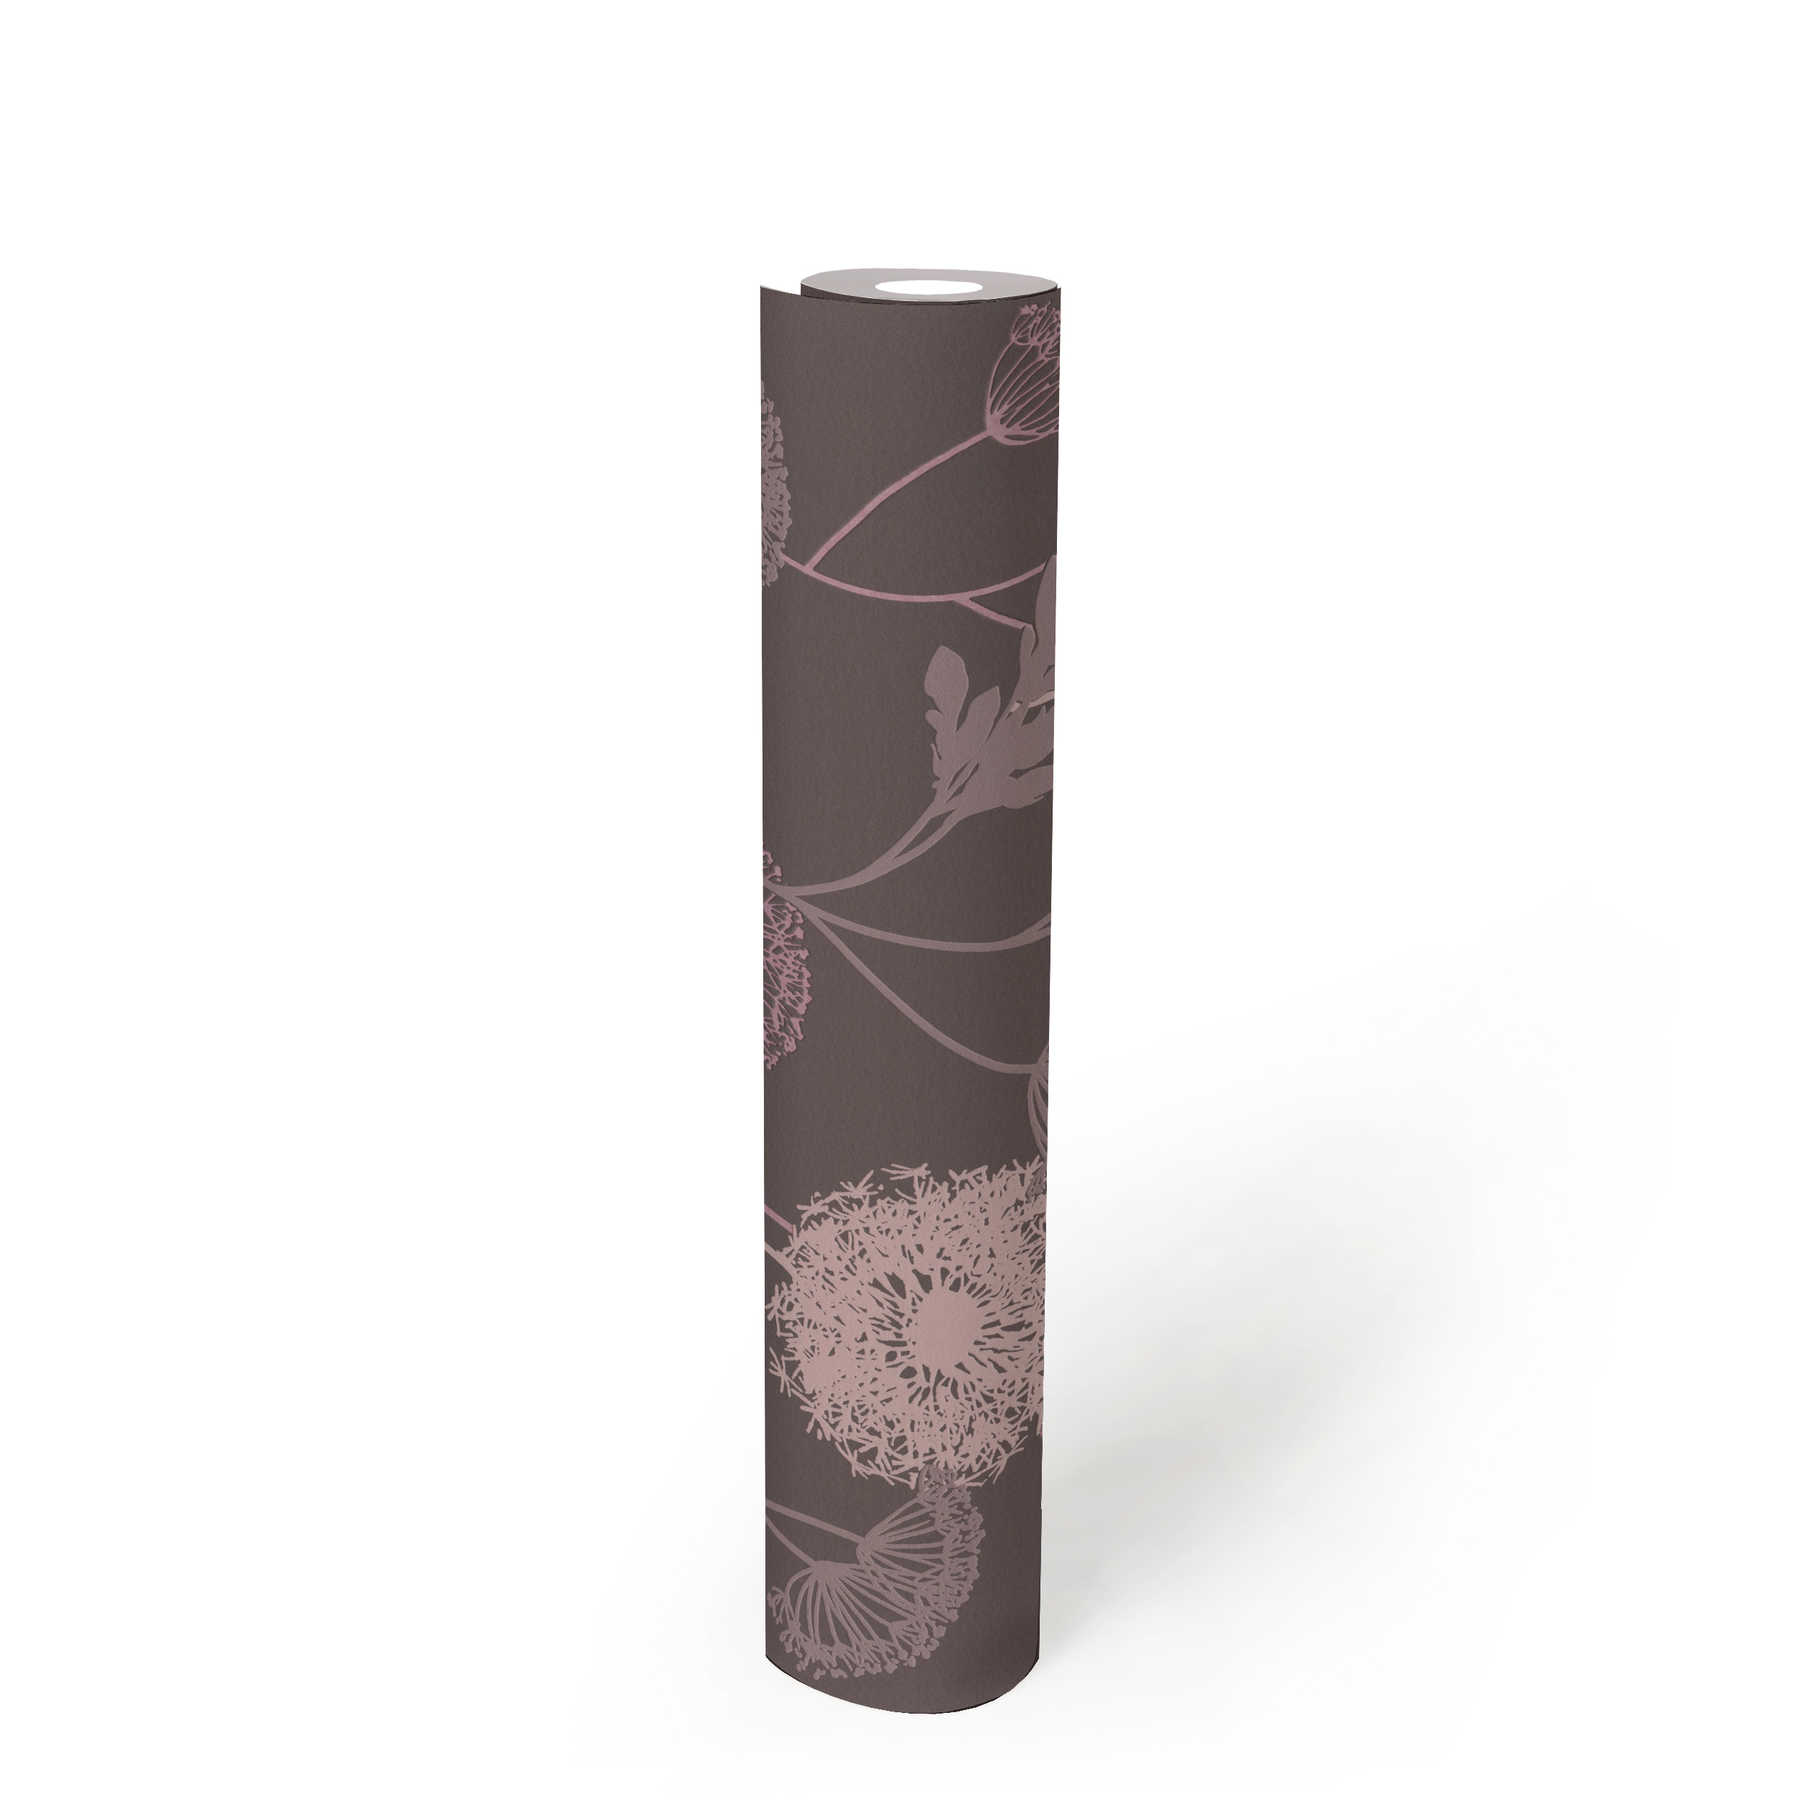             Textured wallpaper with floral pattern in warm colours - brown, pink, beige
        